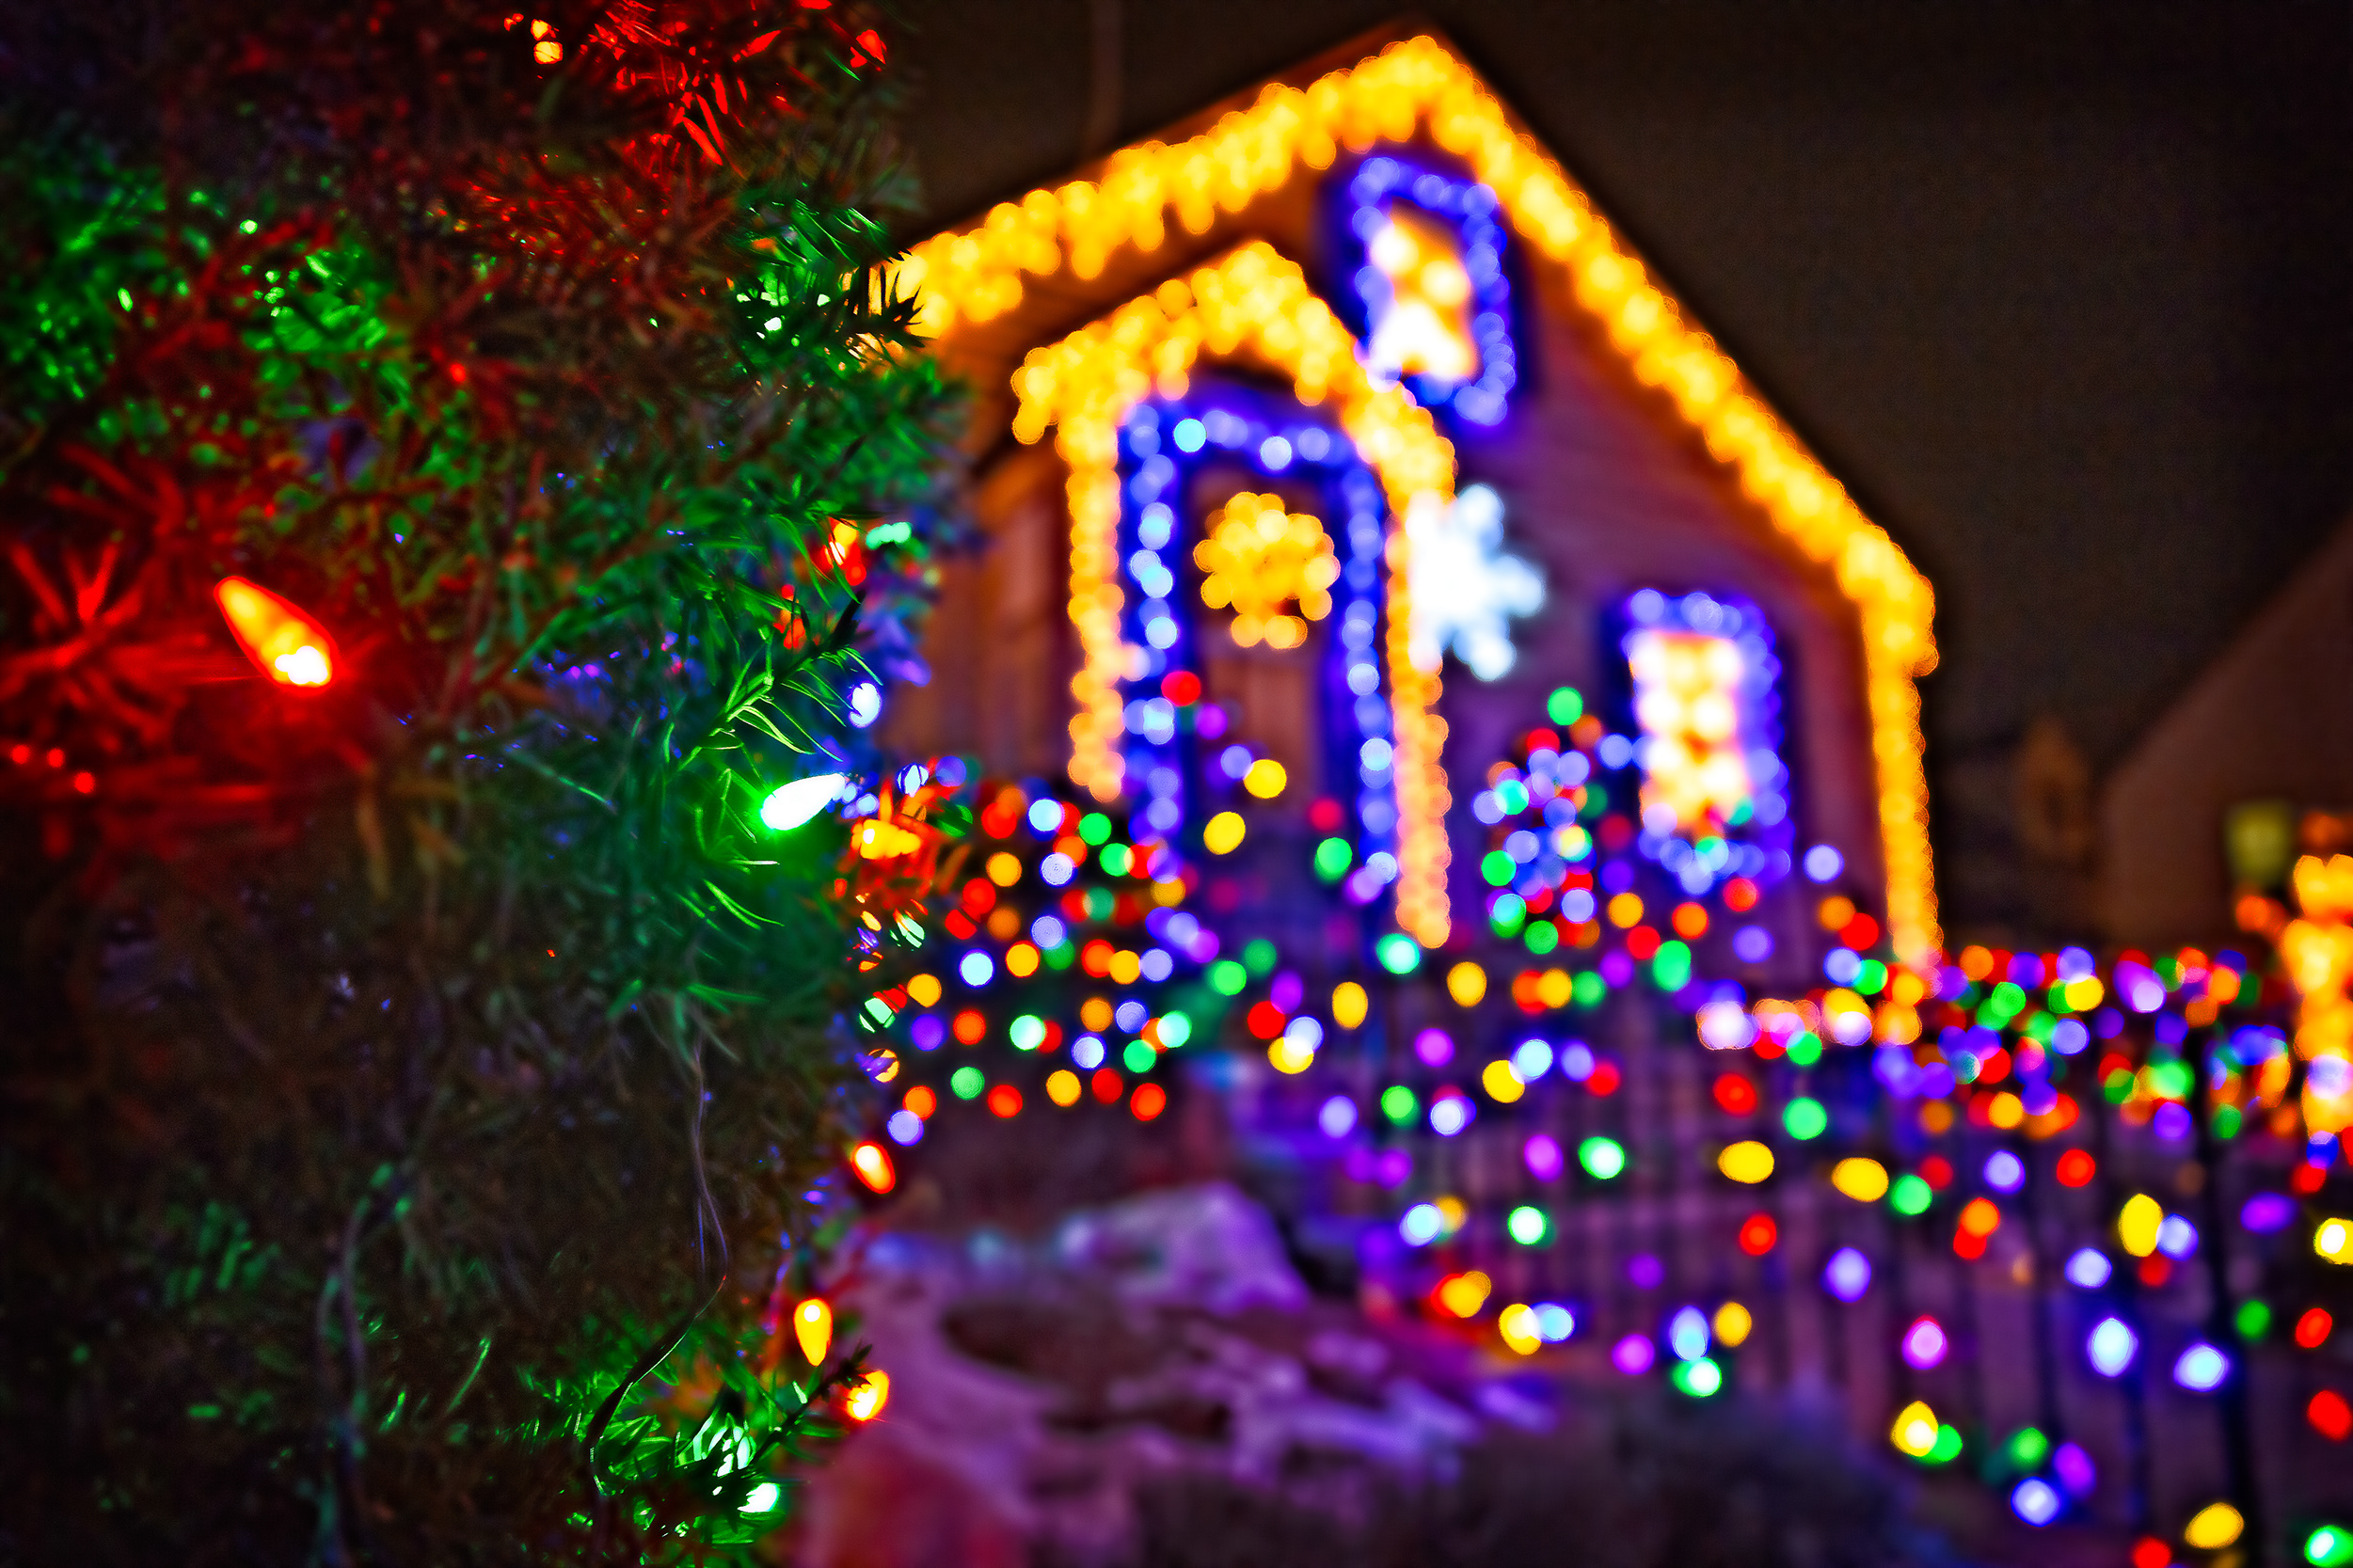 Spruce branches with Christmas ornaments on the background of a house with Christmas lights. Christmas decorations on the facade of the house. Blurred background